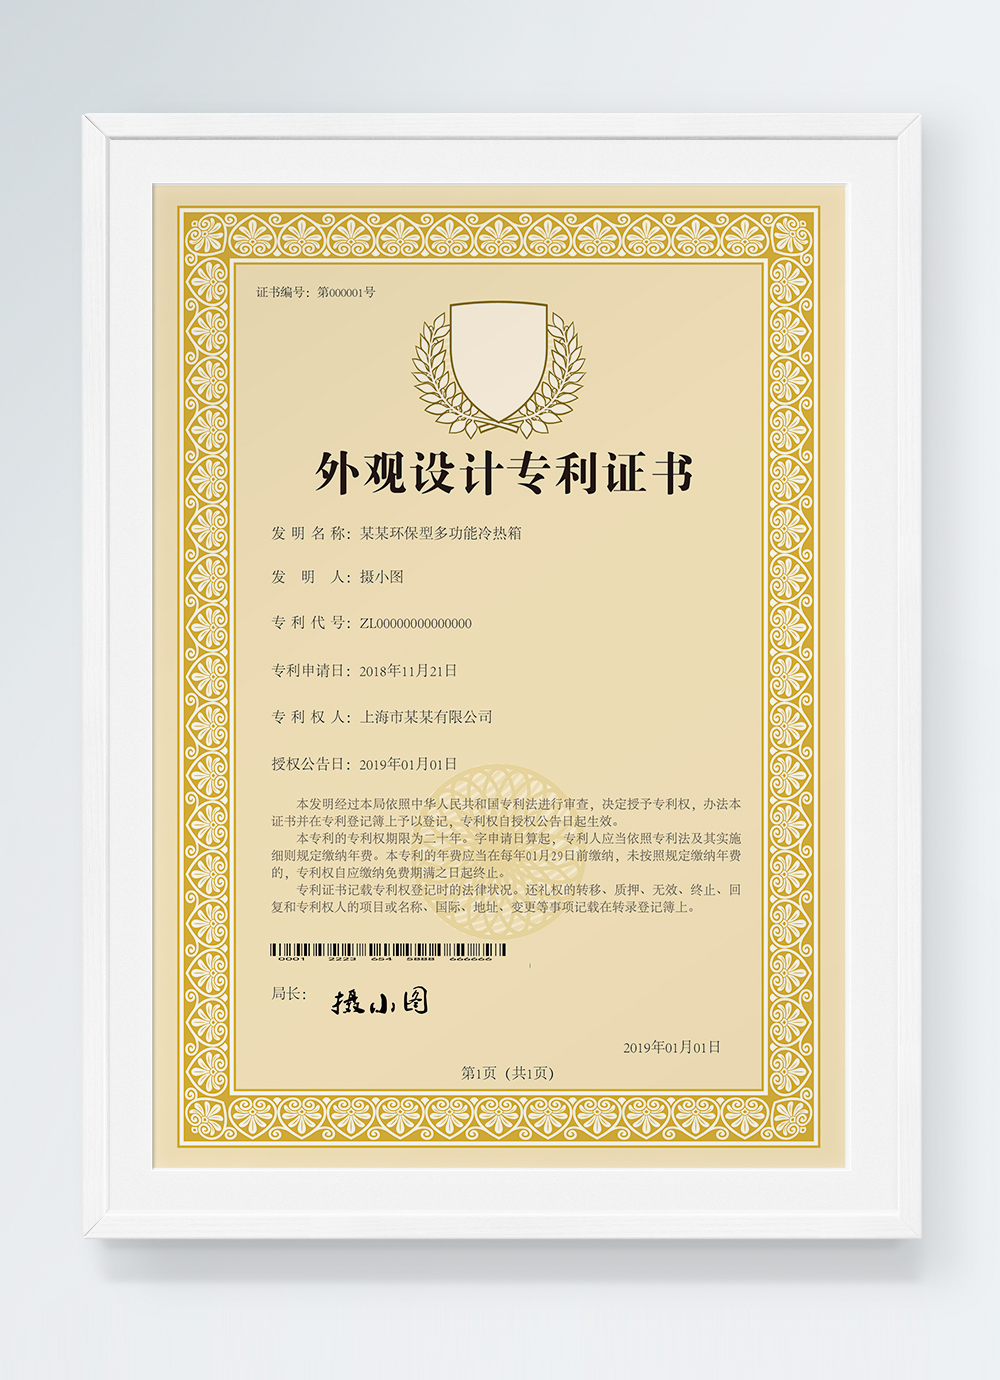 Design patent certificate template image_picture free download ...